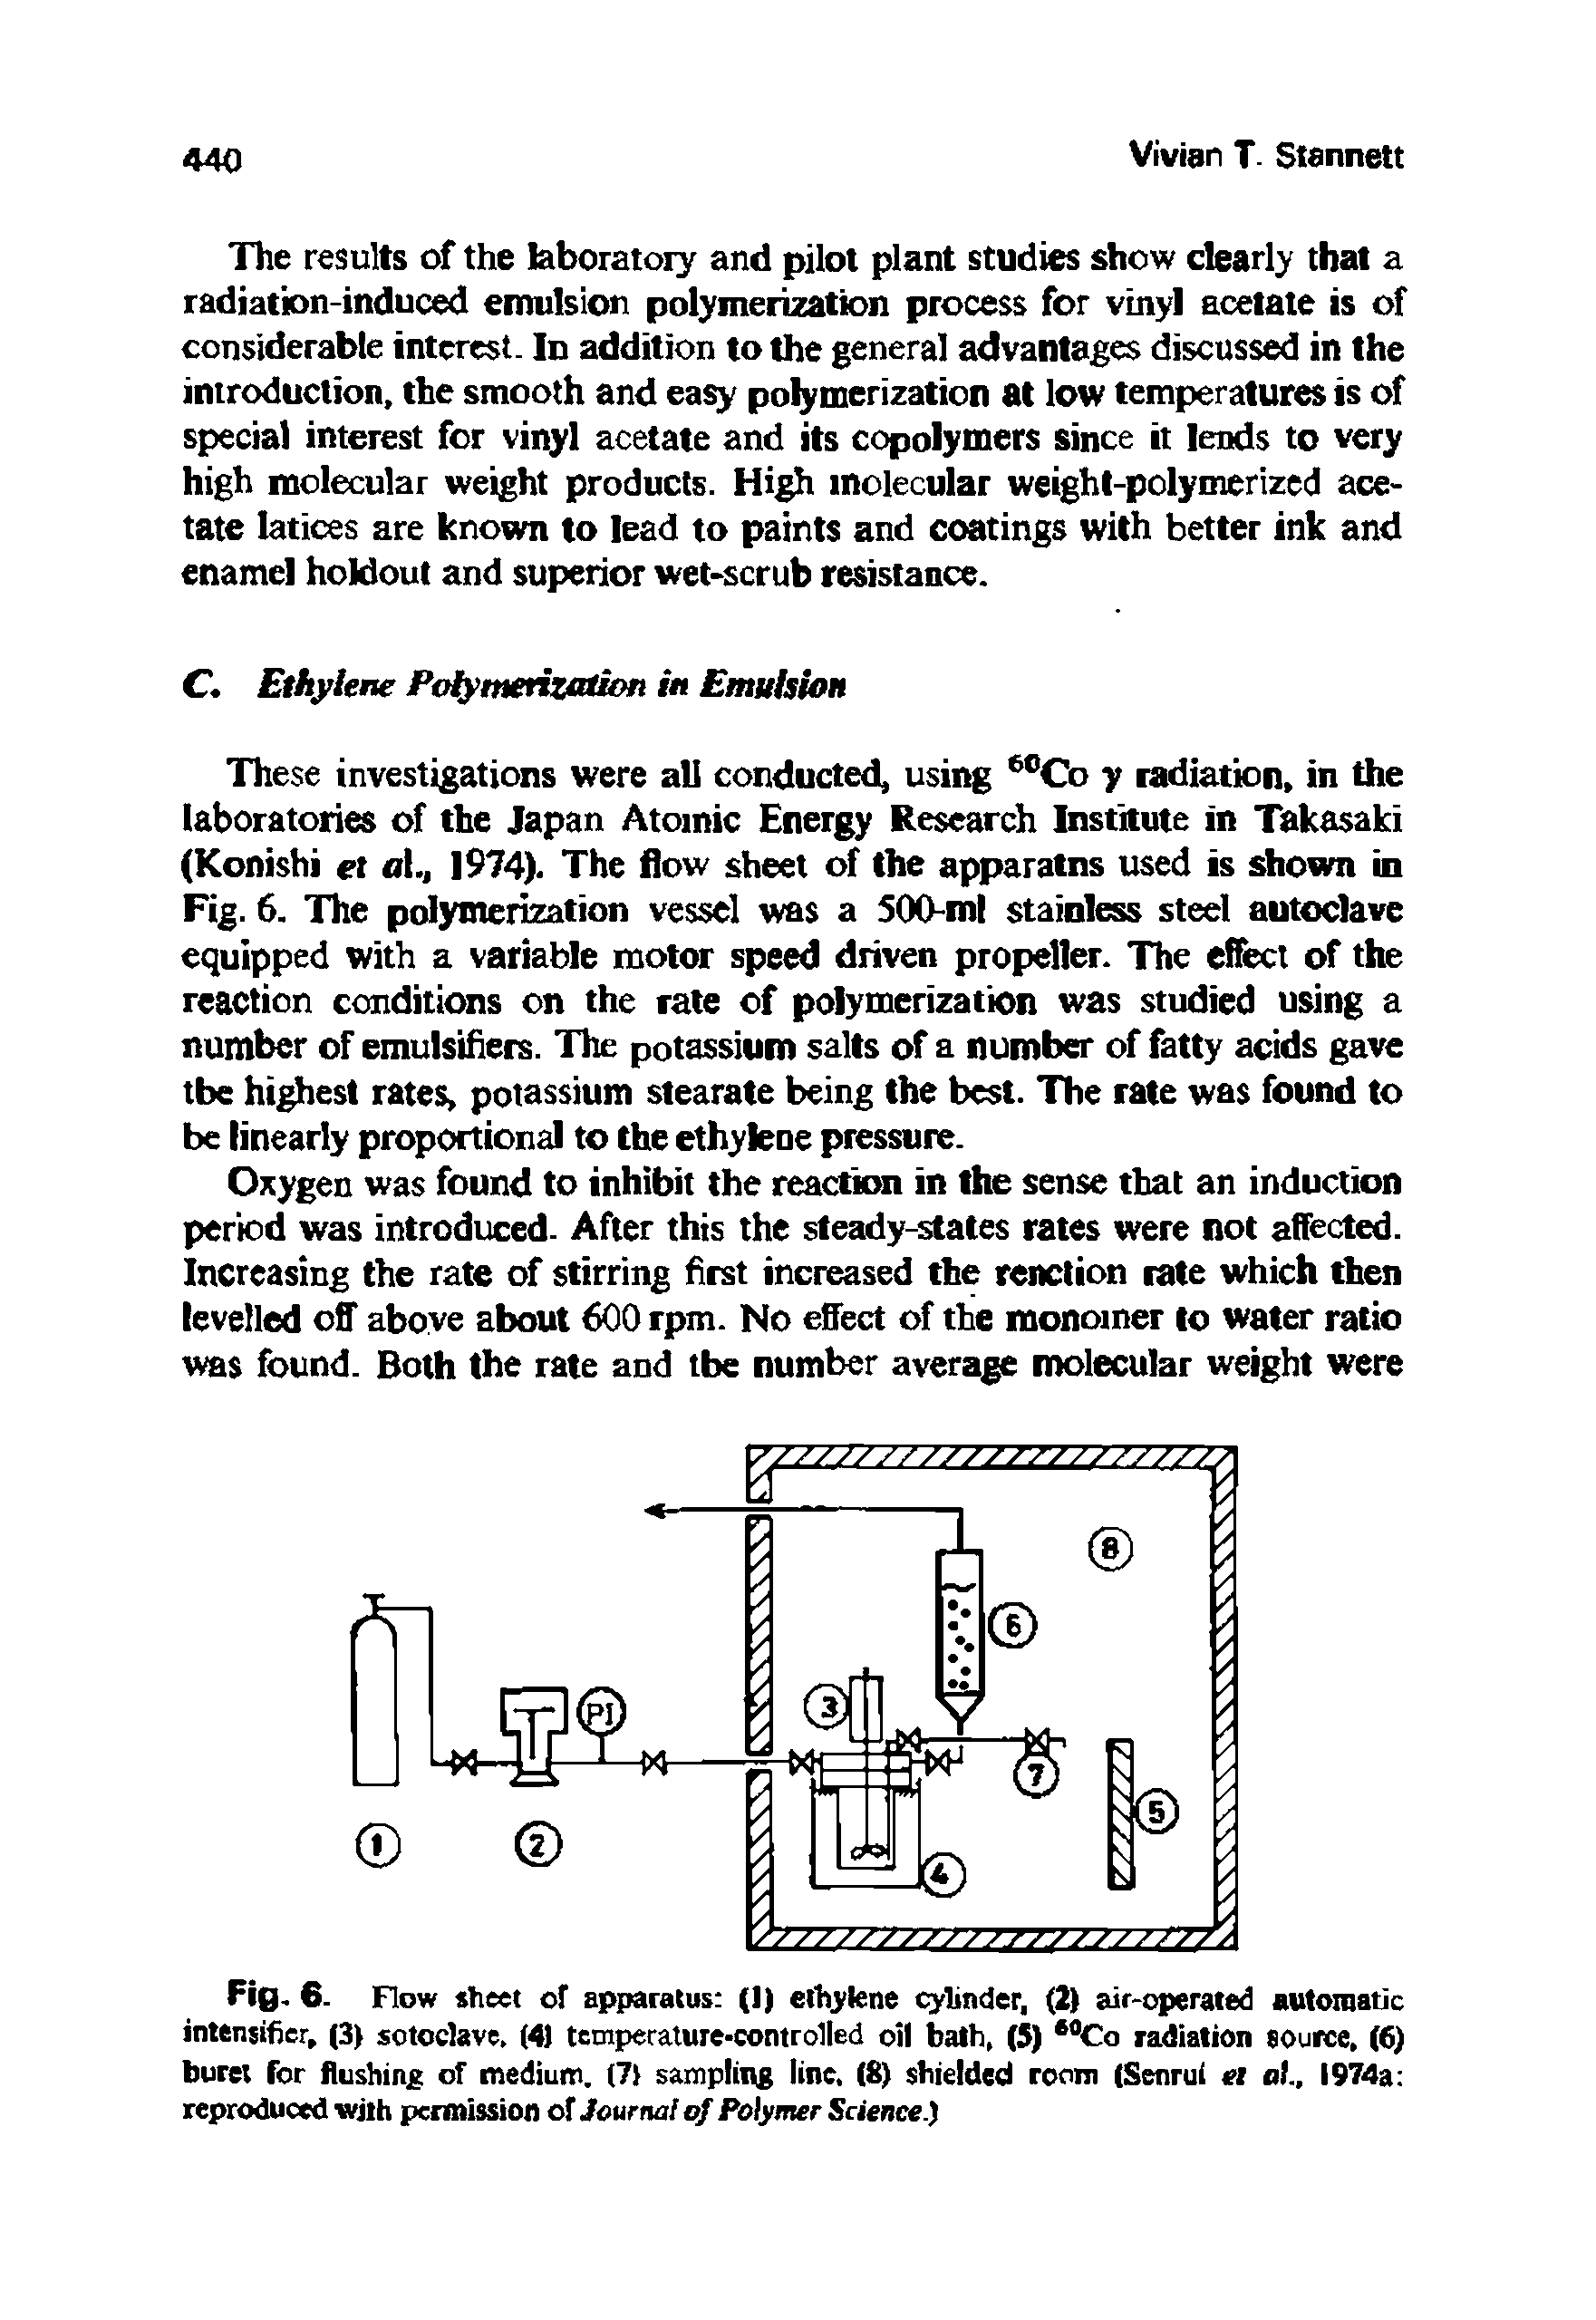 Fig. 6. Flow sheet of apparatus (I) ethylene cylinder, (2) air-operated automatic intensificr, (3) sctoclave. (41 temperature-controlled oil bath, (5) Co radiation source, (6) buret for flushing of medium. (7) samplittg line, (8) shielded room (Senrul ei at., 1974a reproduced with permission of Journal of Polymer Science.)...